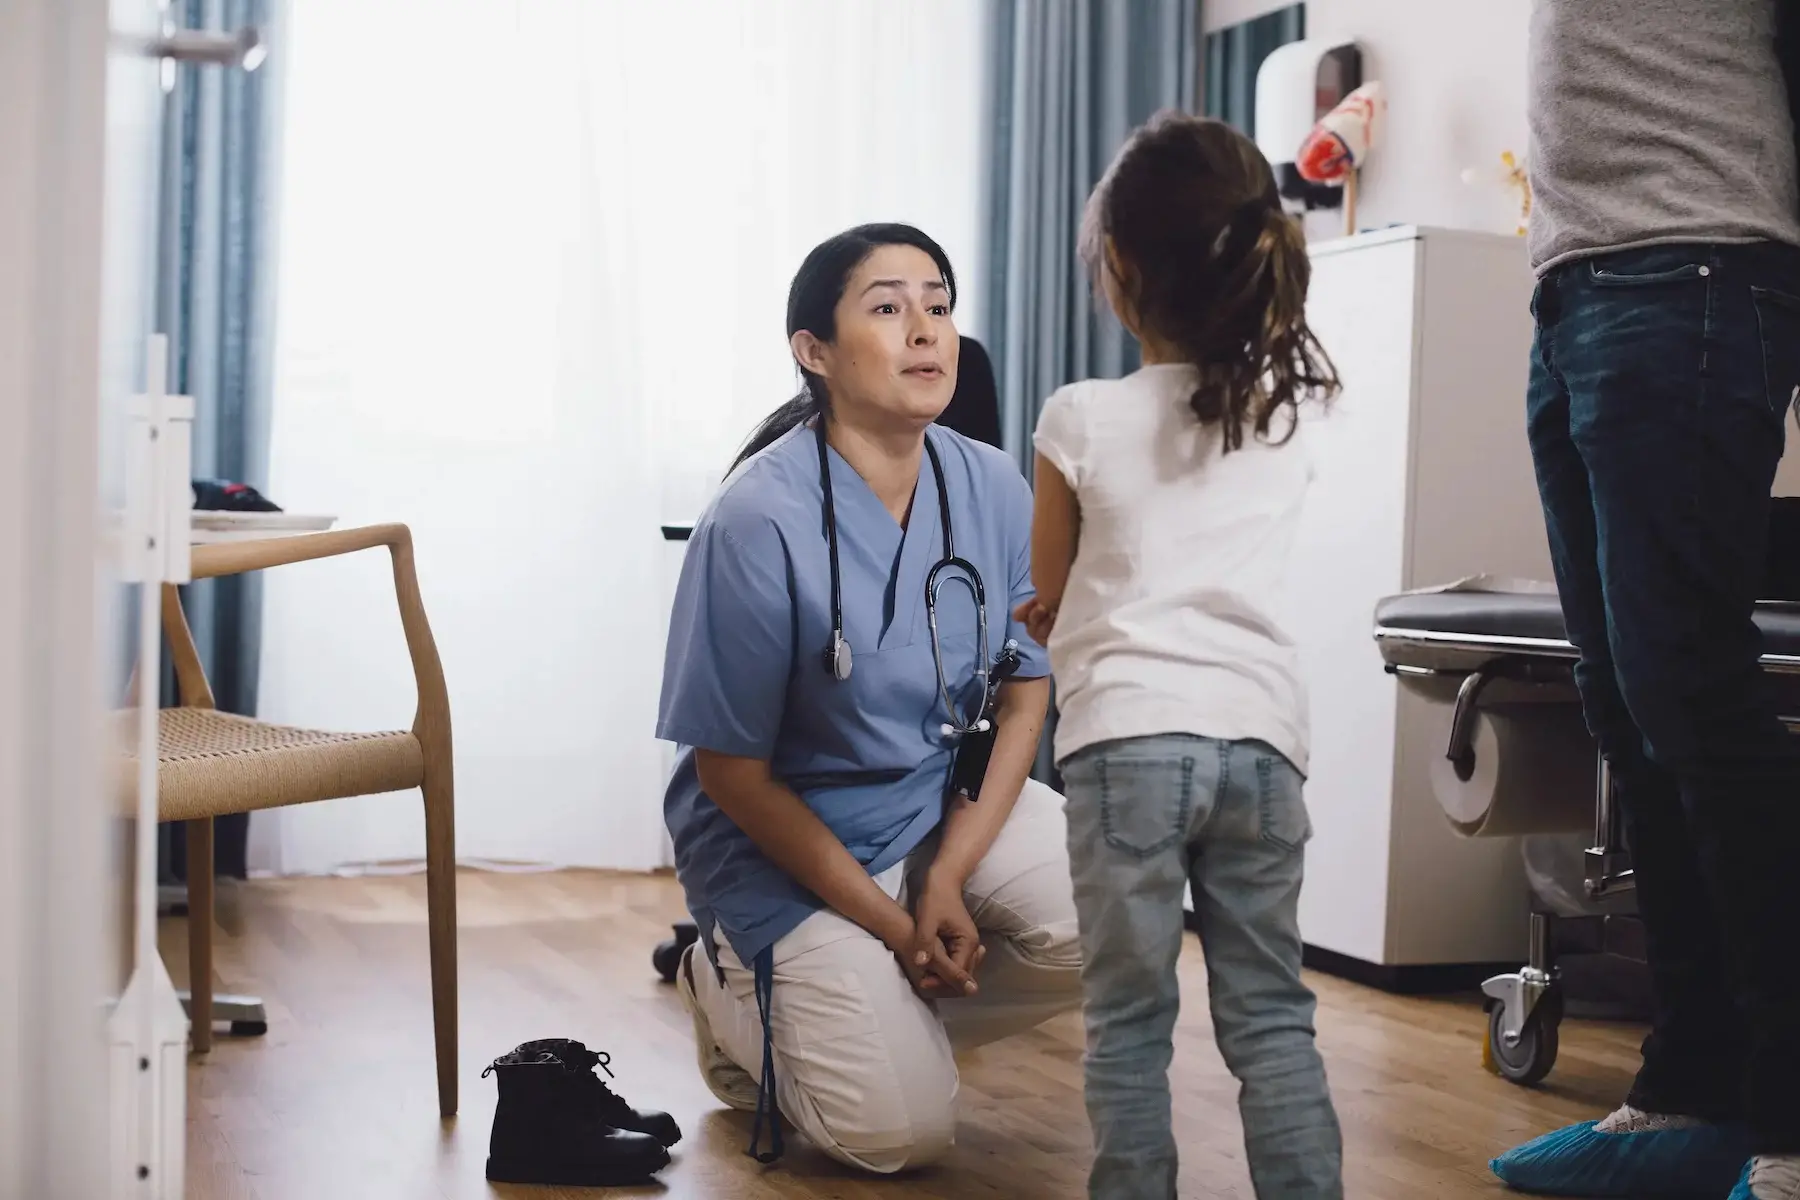 A pediatrician kneels on the clinic floor to speak to a young girl